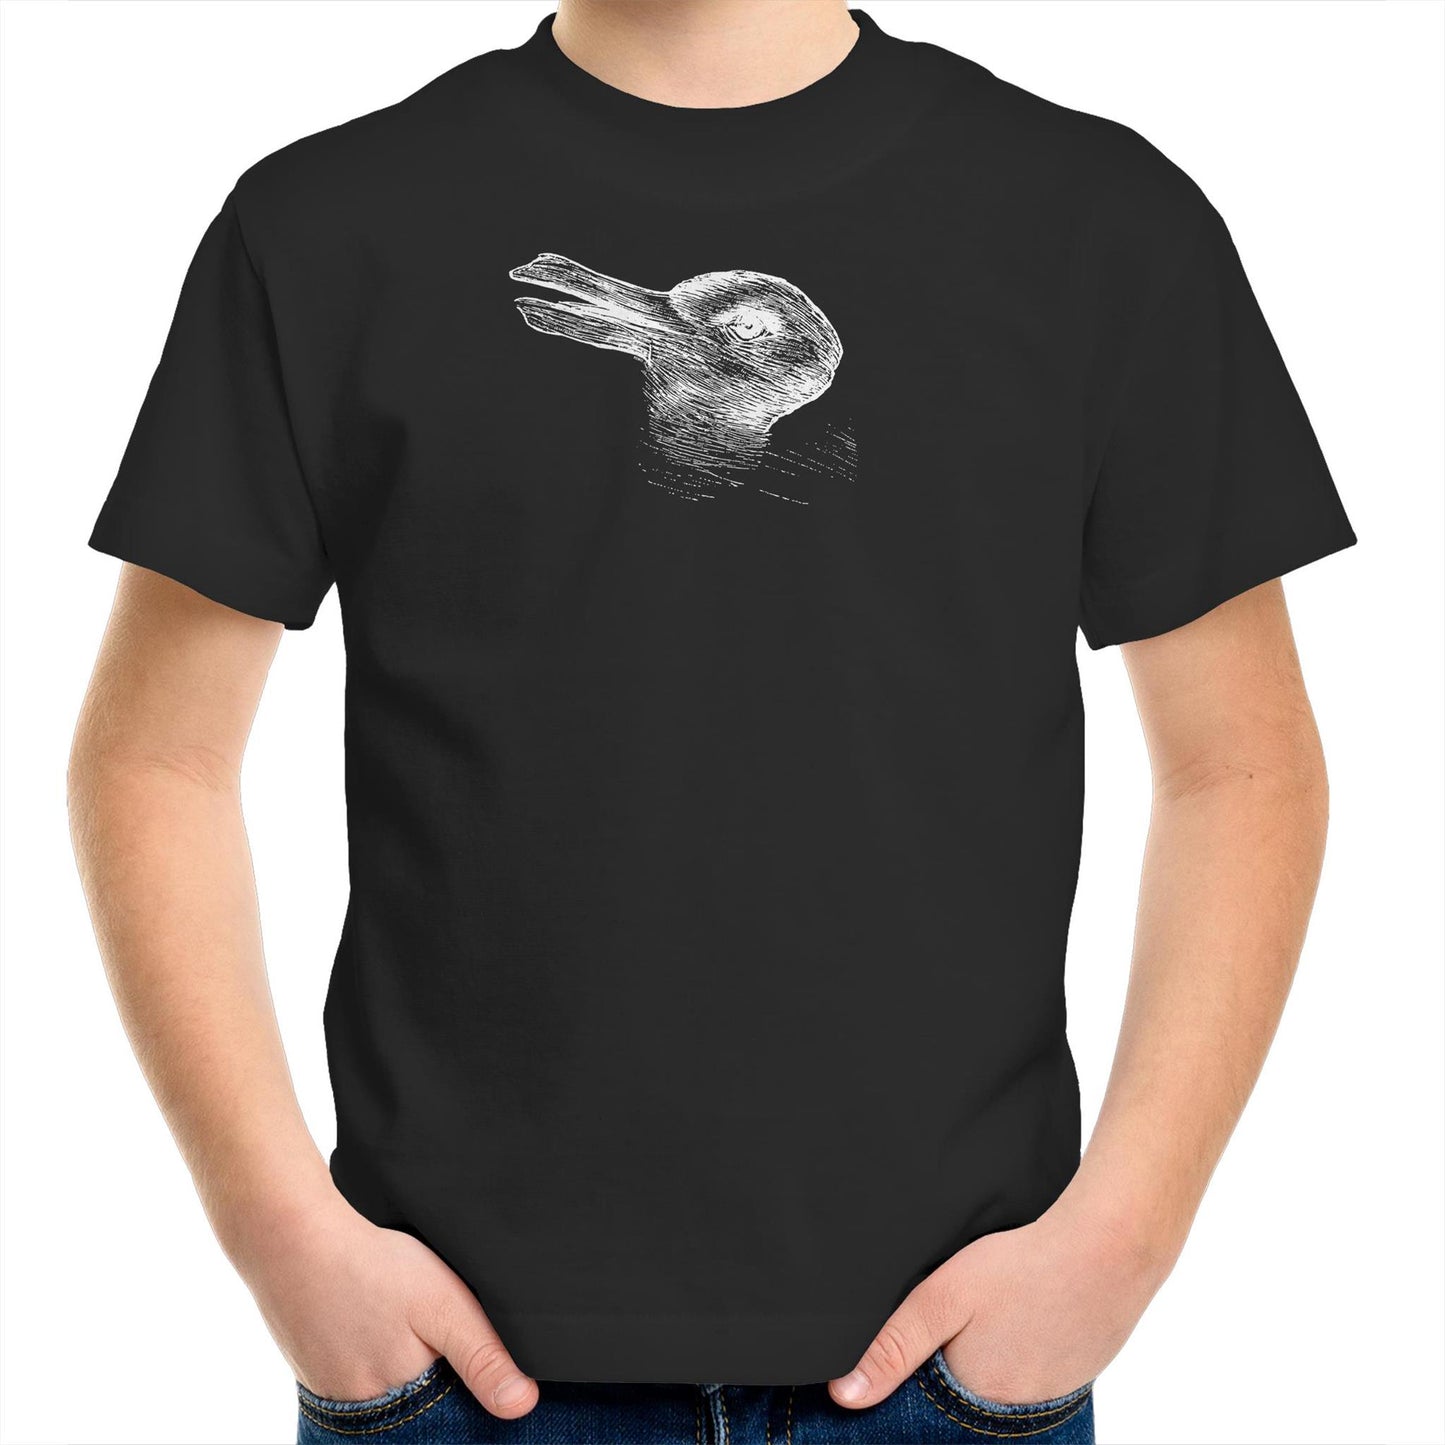 Duck-Rabbit T Shirts for Kids